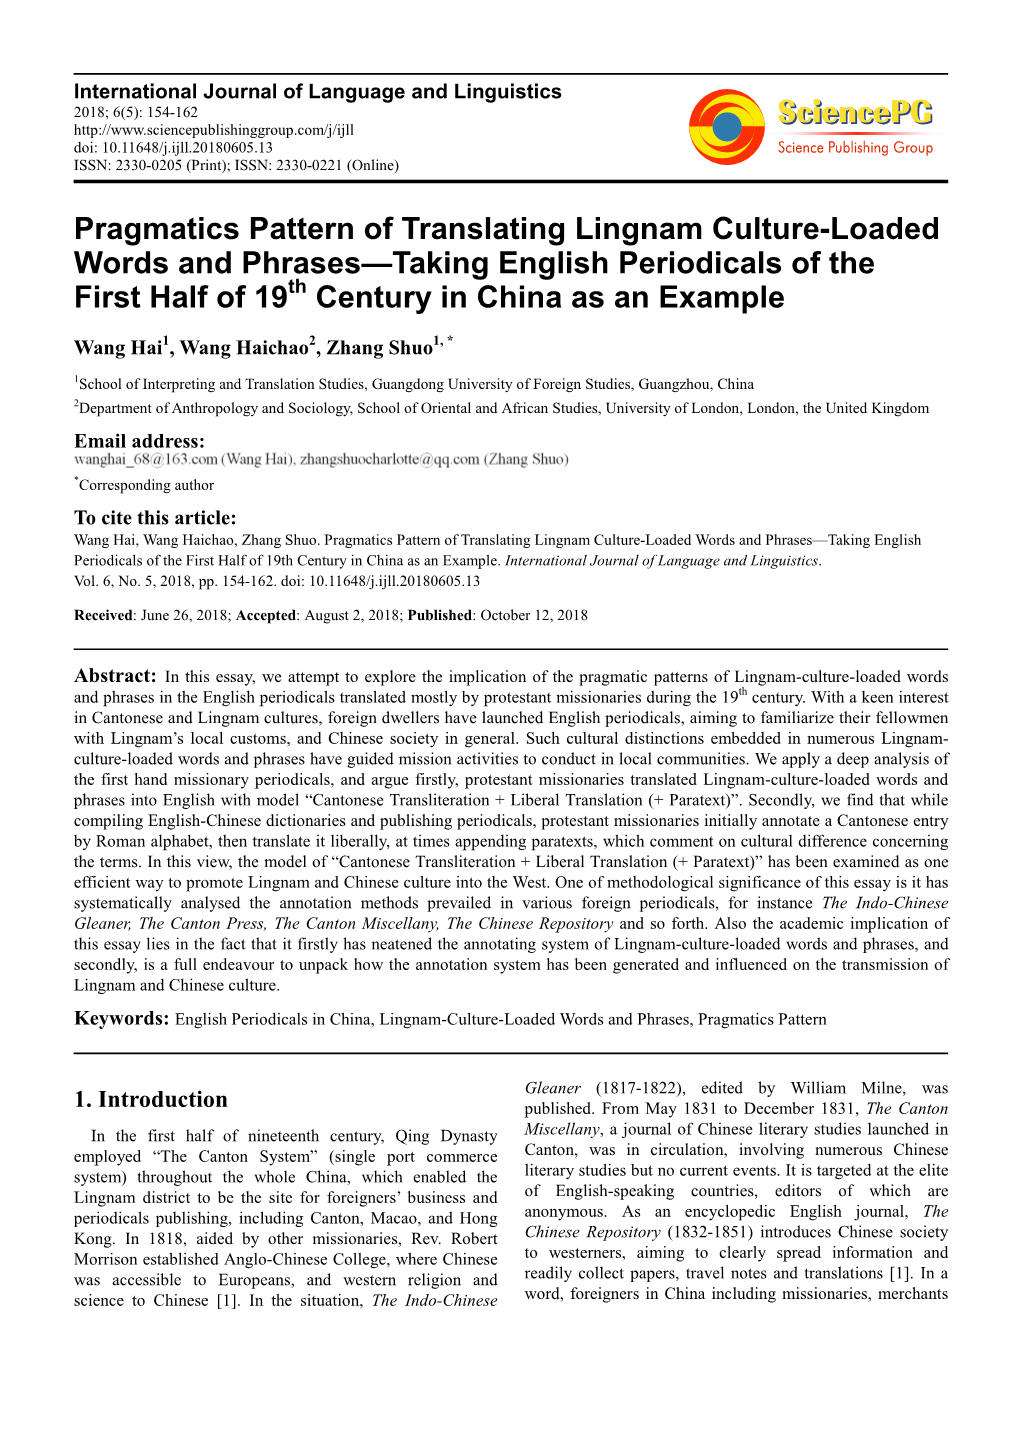 Pragmatics Pattern of Translating Lingnam Culture-Loaded Words and Phrases—Taking English Periodicals of the First Half of 19 Th Century in China As an Example